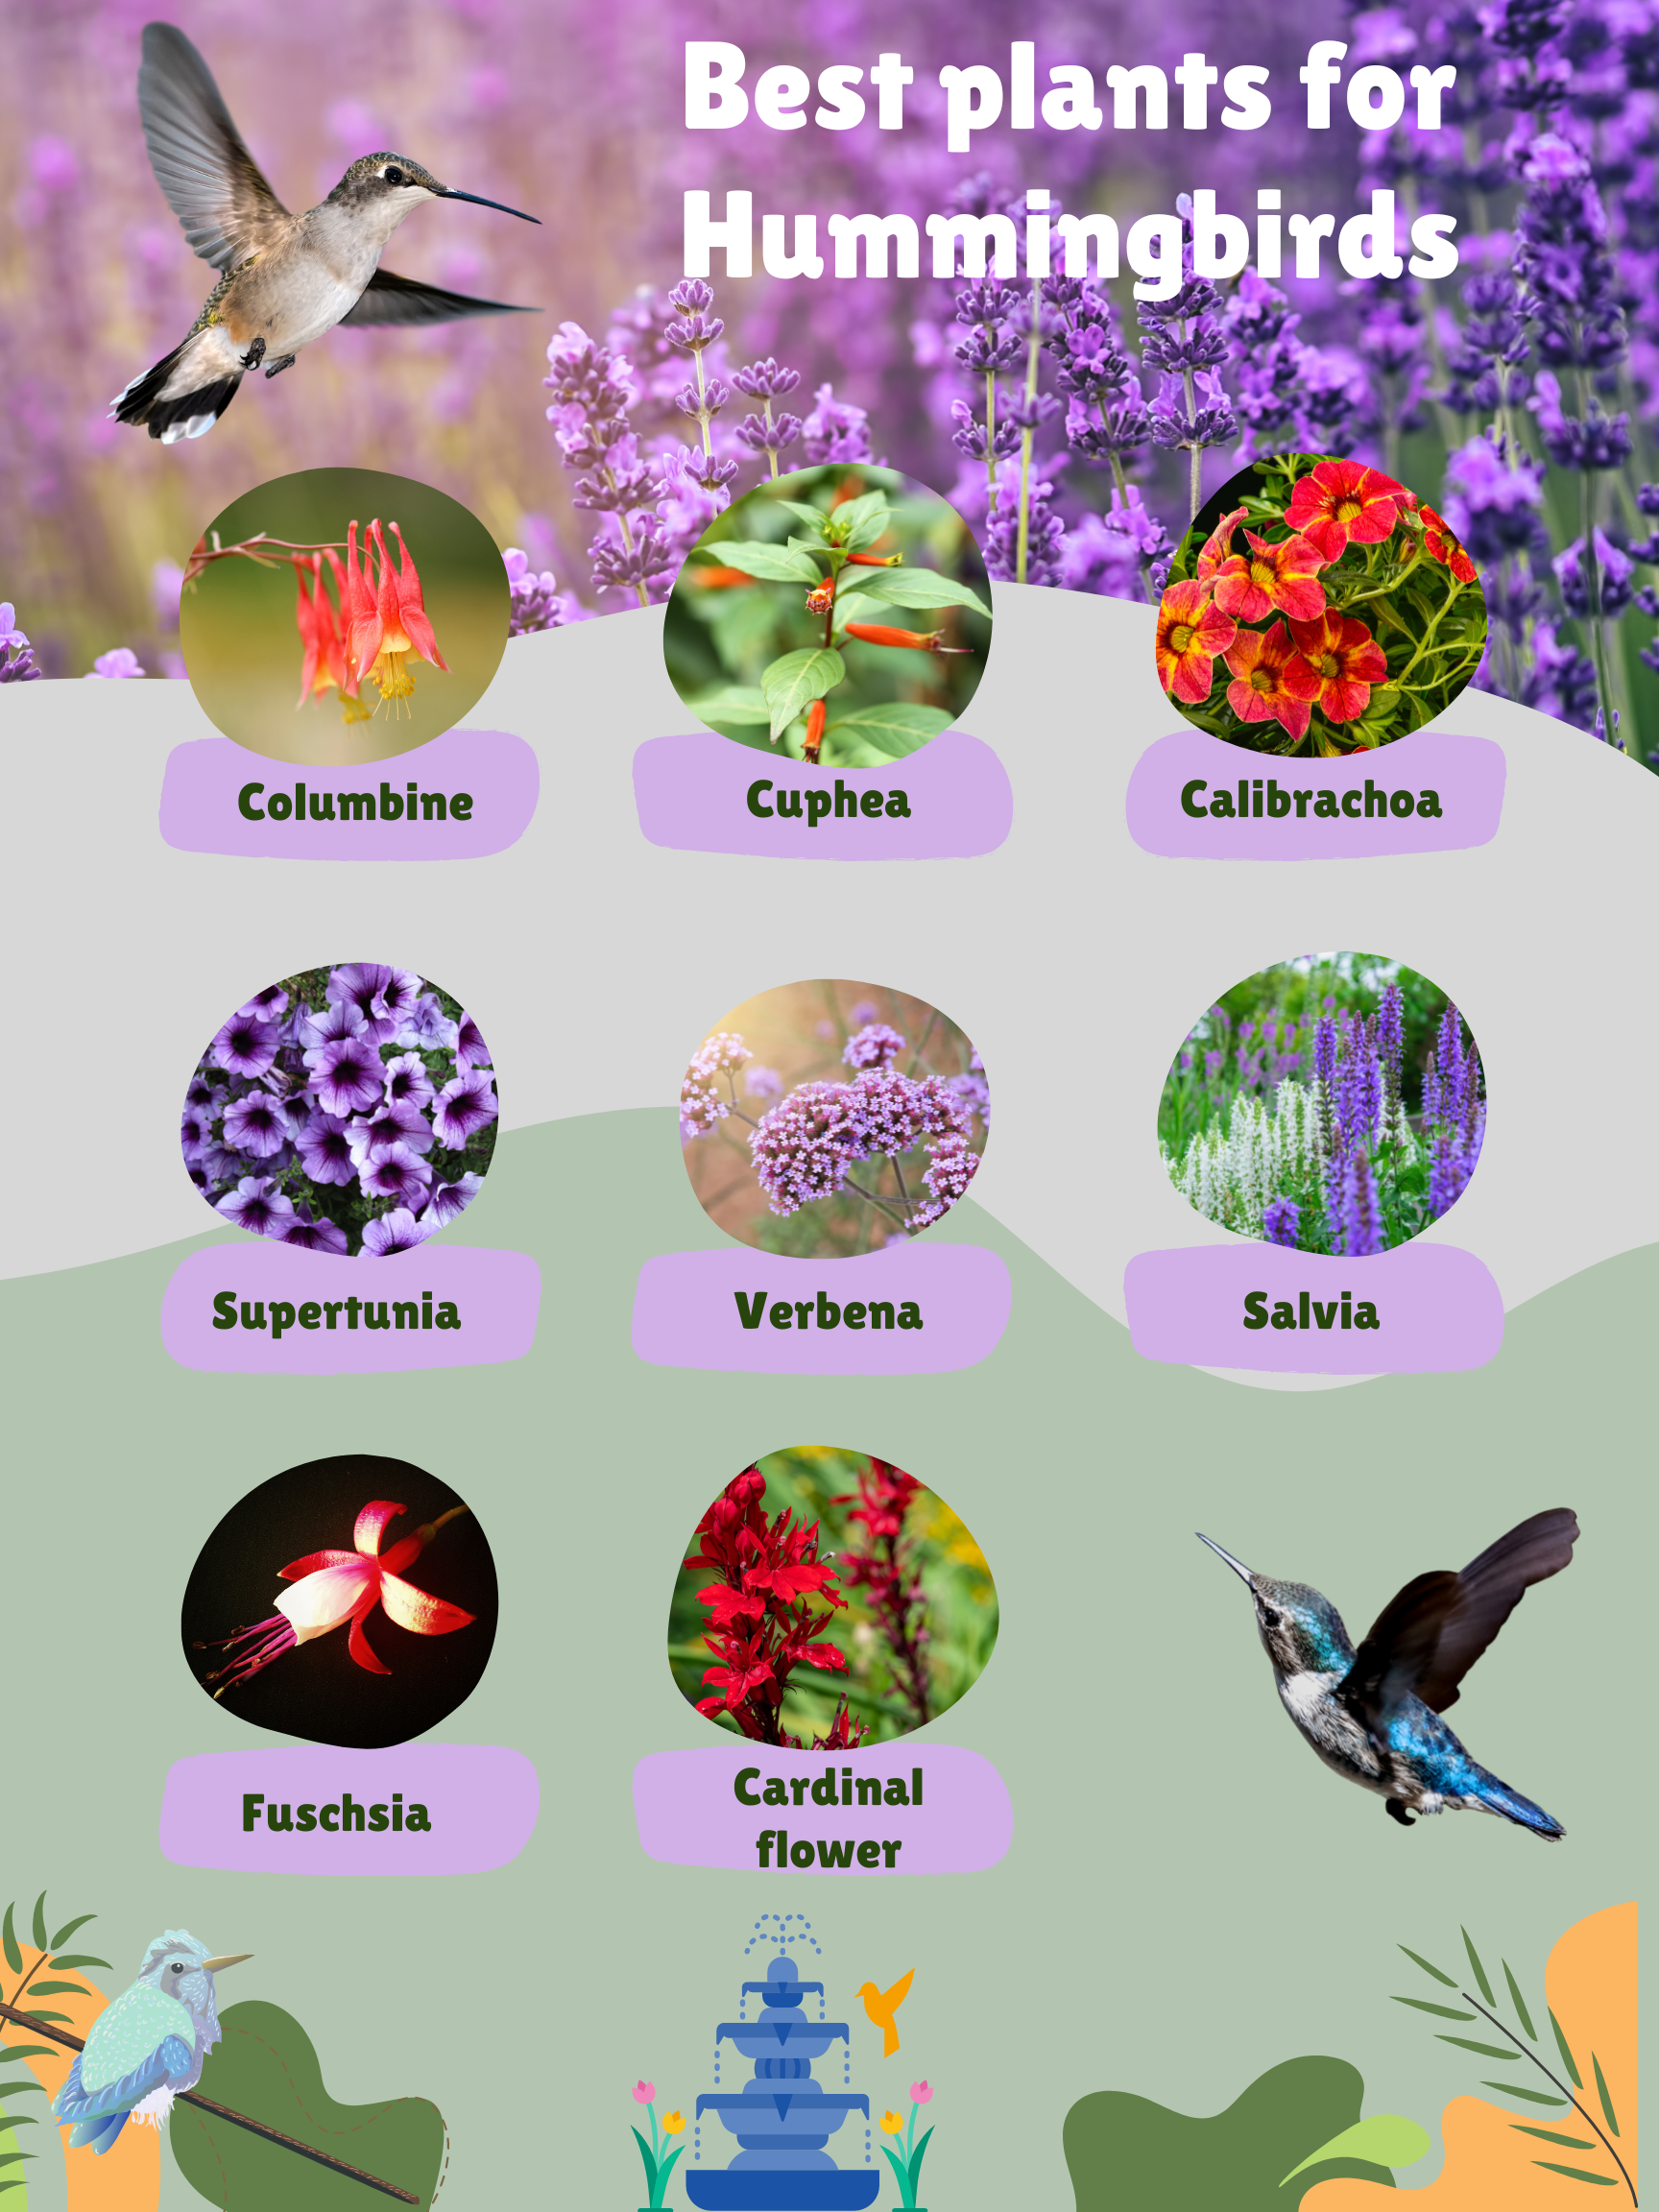 Some of the best plants to attract hummingbirds